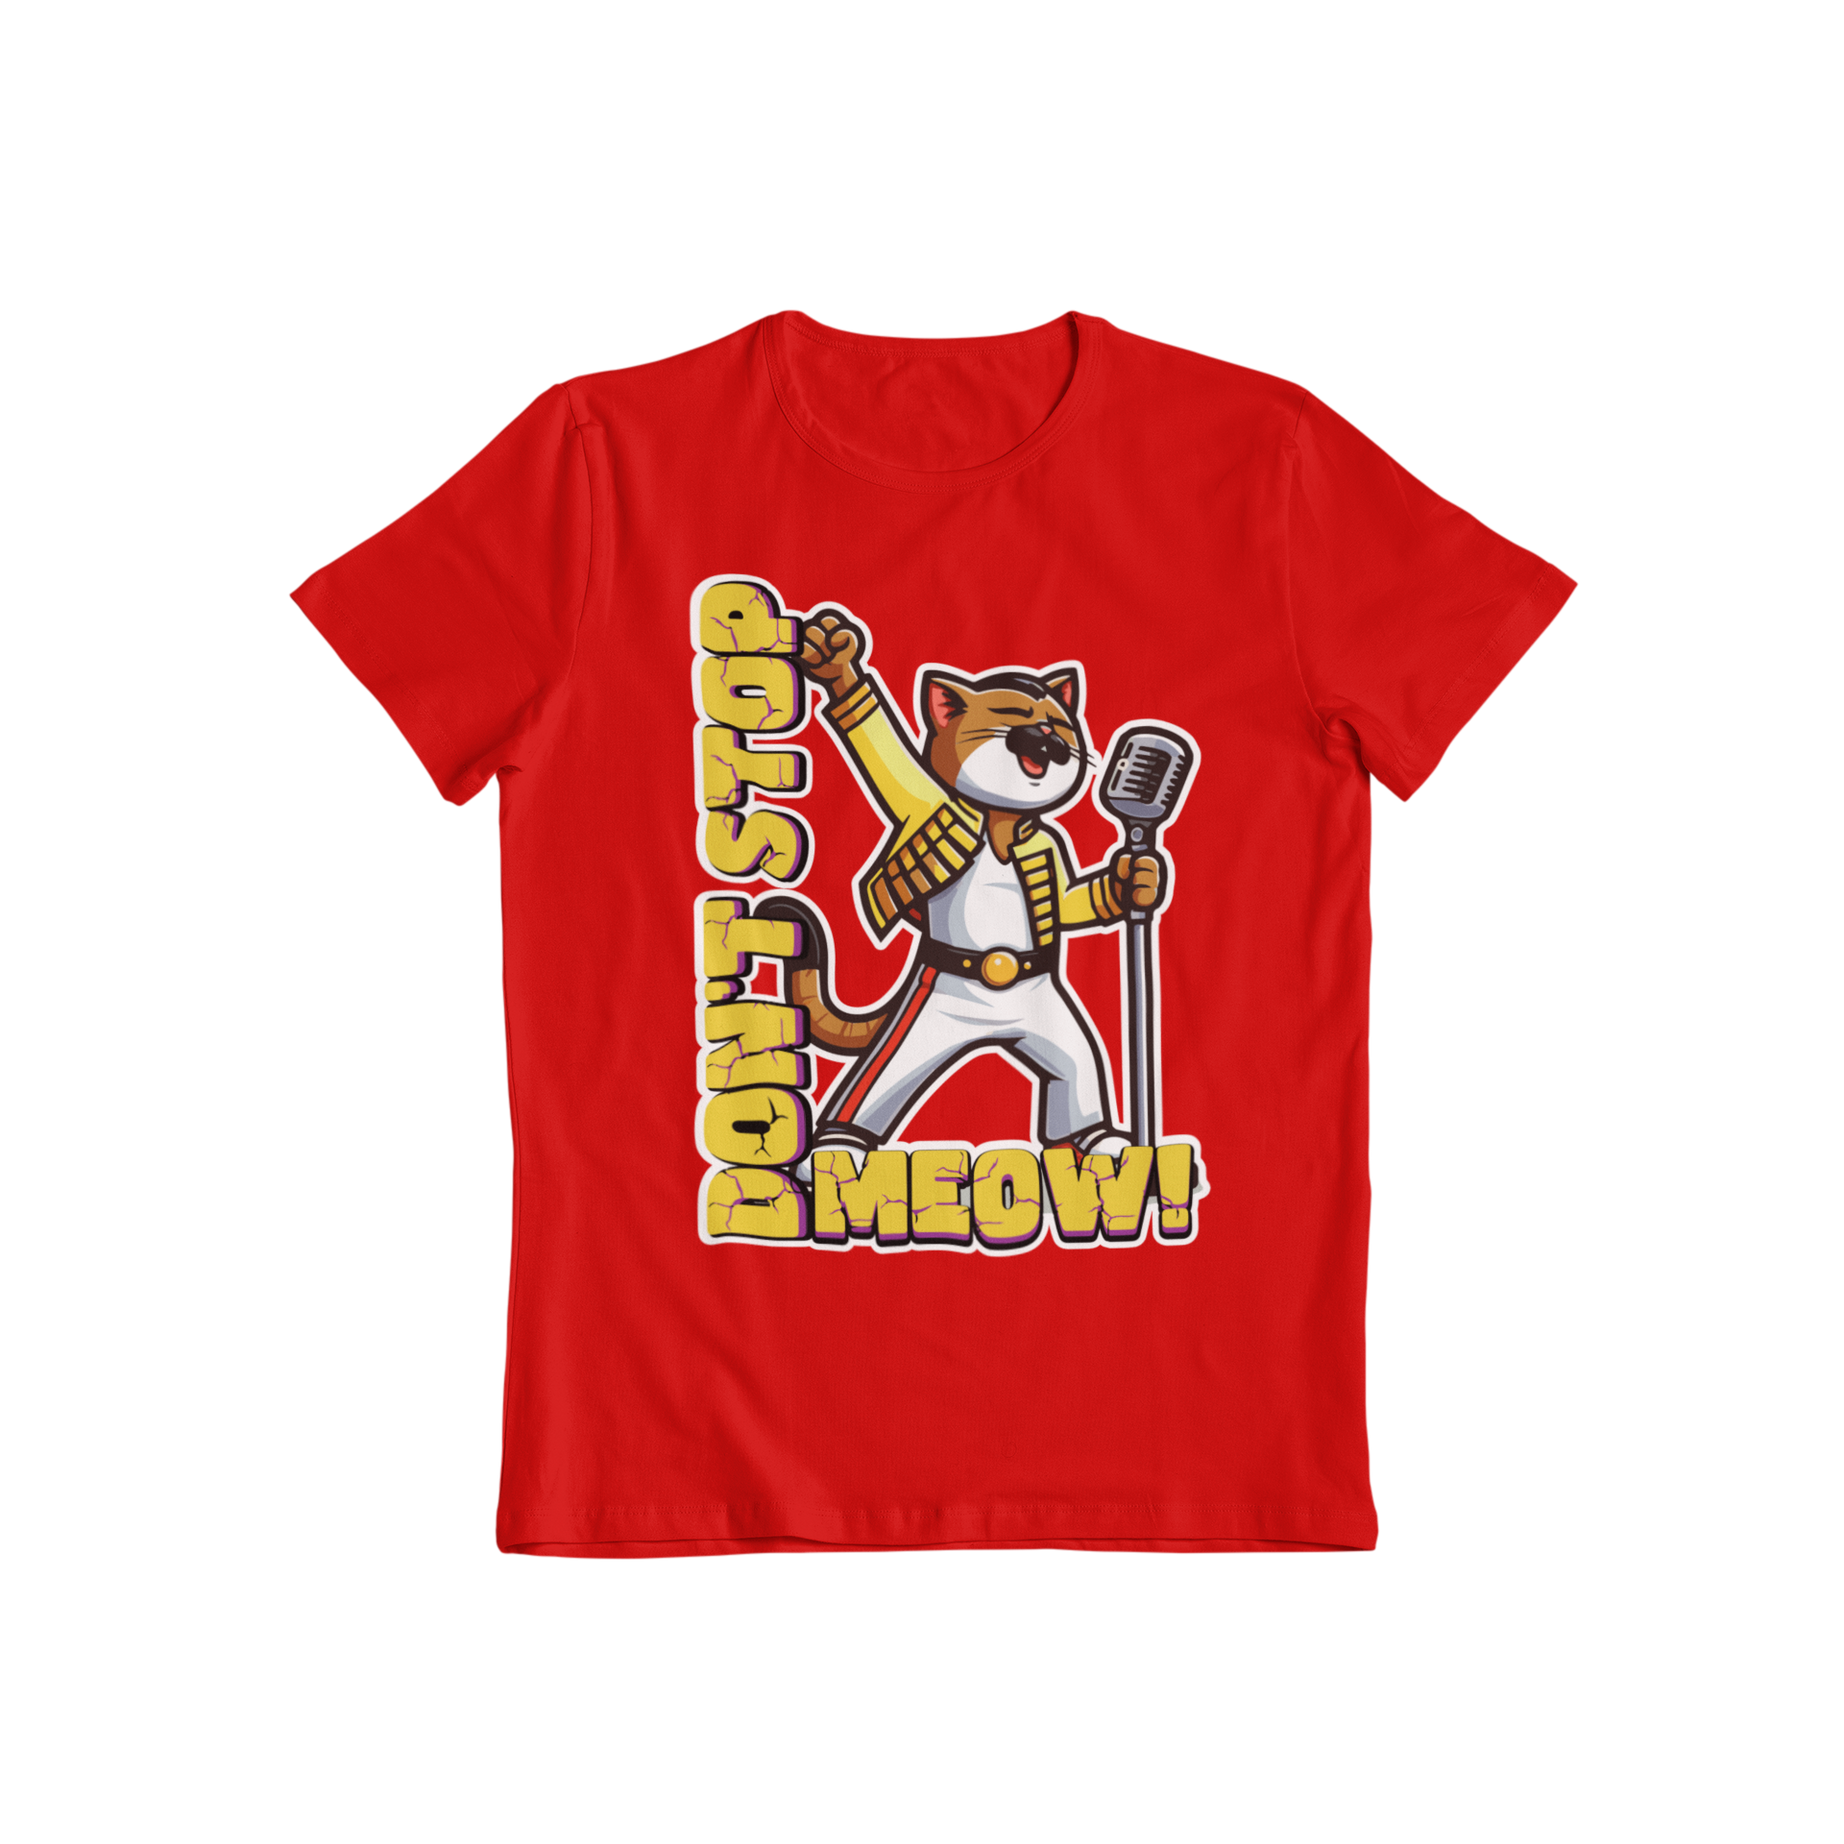 Unleash your inner rockstar with the Don't Stop Meow T-shirt. This classic tee features a feline twist on the iconic 'Don't Stop Me Now' by Queen, with a cat dressed as Freddie Mercury. Perfect for any music lover or cat enthusiast. (Note: may cause excessive meowing and air guitar playing.)